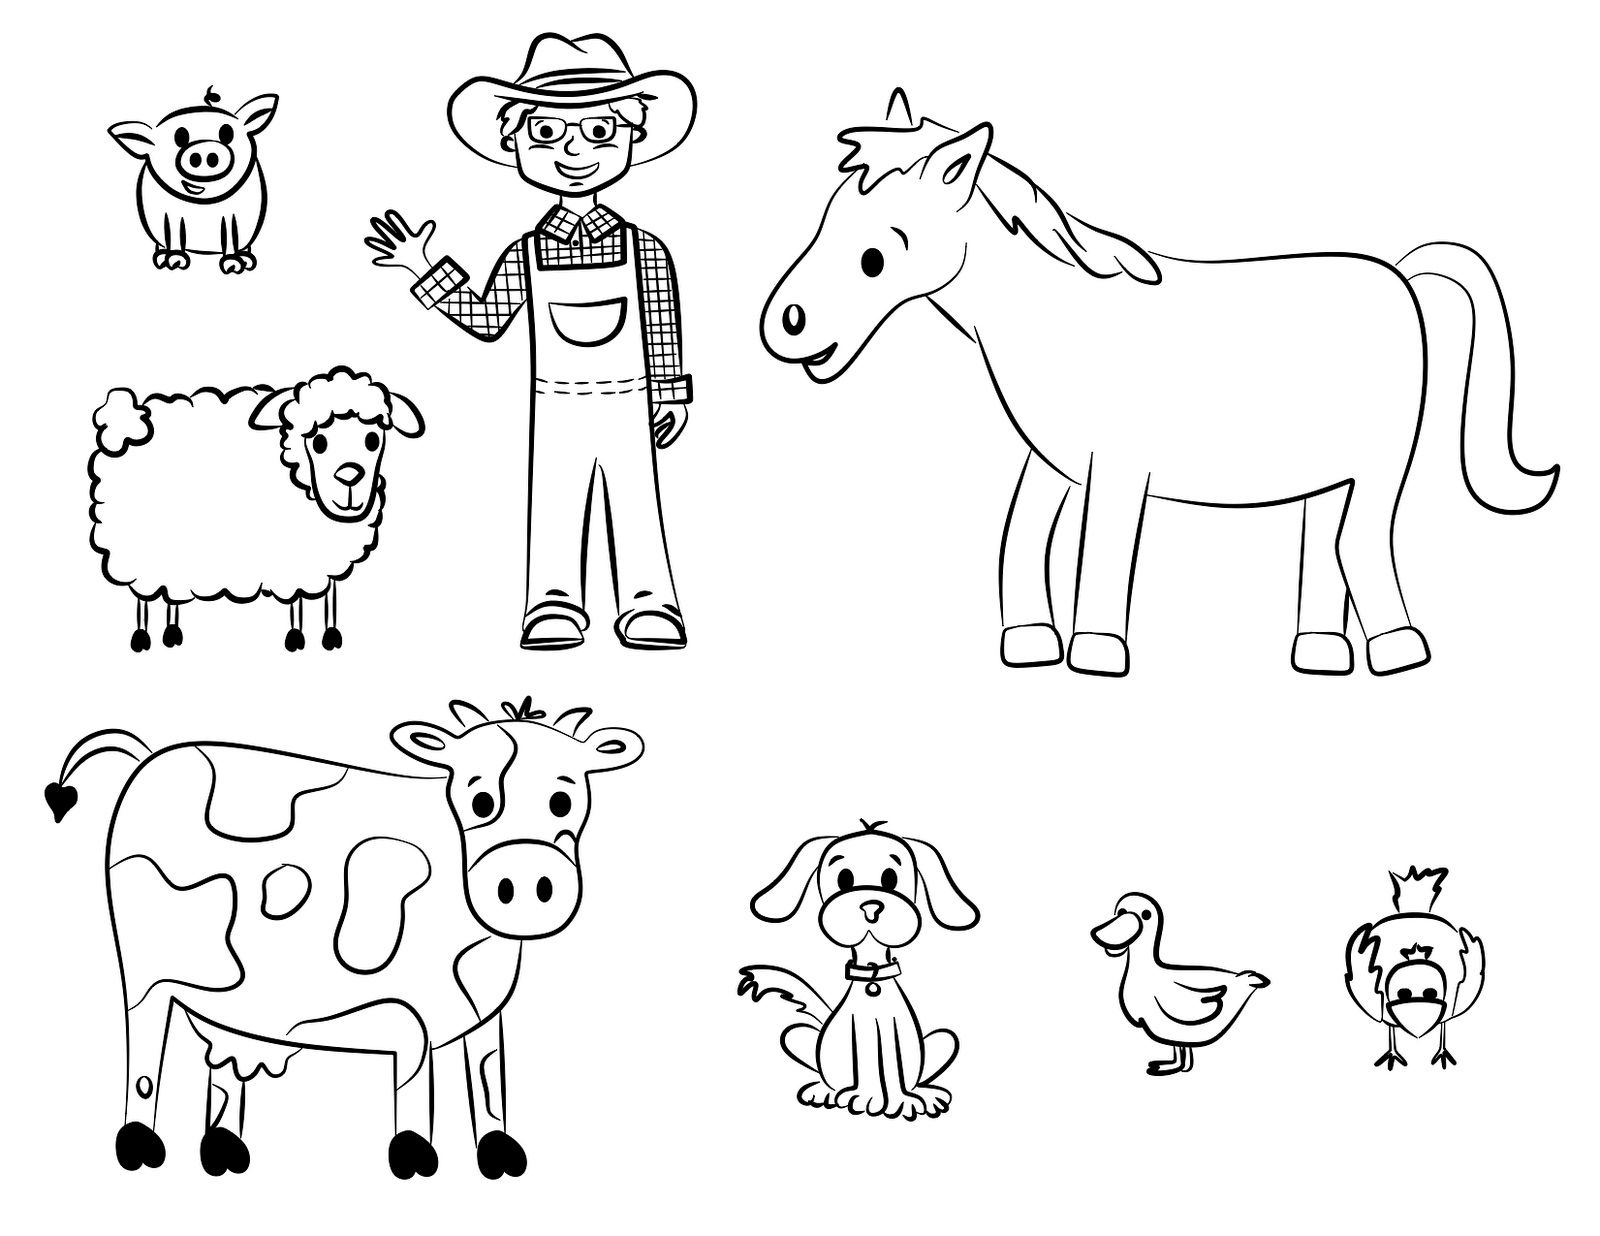 Free Printable Farm Animal Coloring Pages For Kids | June | Farm - Free Printable Farm Animal Cutouts